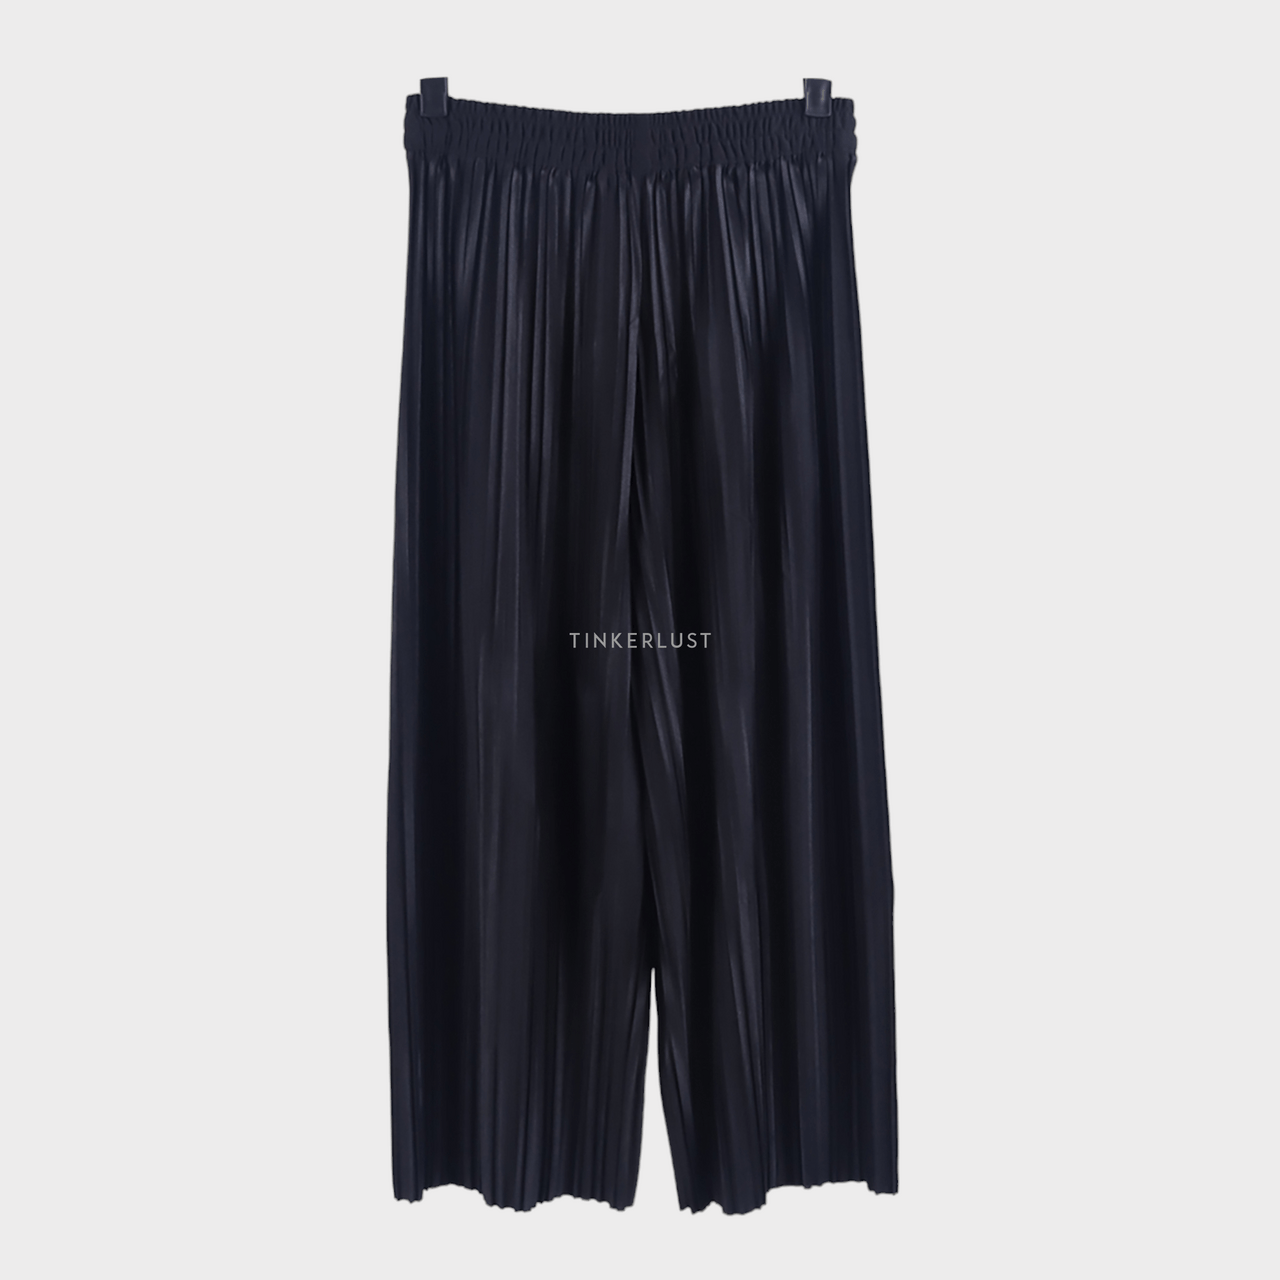 Beatrice Clothing Black Pleated Long Pants